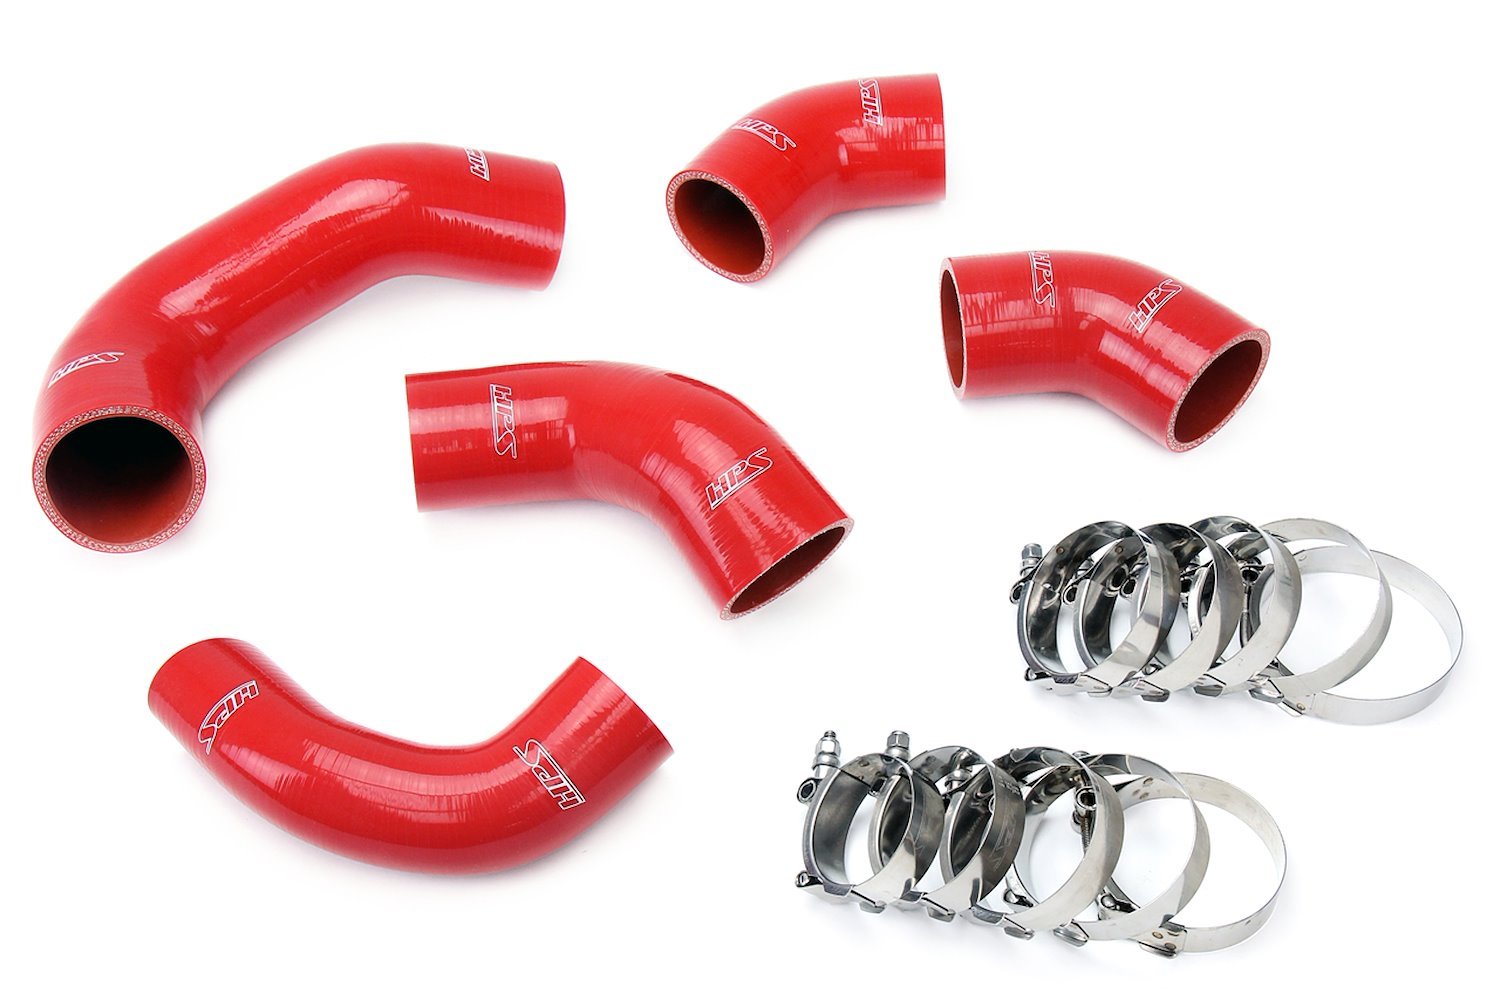 57-1227-RED Intercooler Hose Kit, High-Temp 4-Ply Reinforced Silicone, Replace OEM Rubber Intercooler Turbo Boots